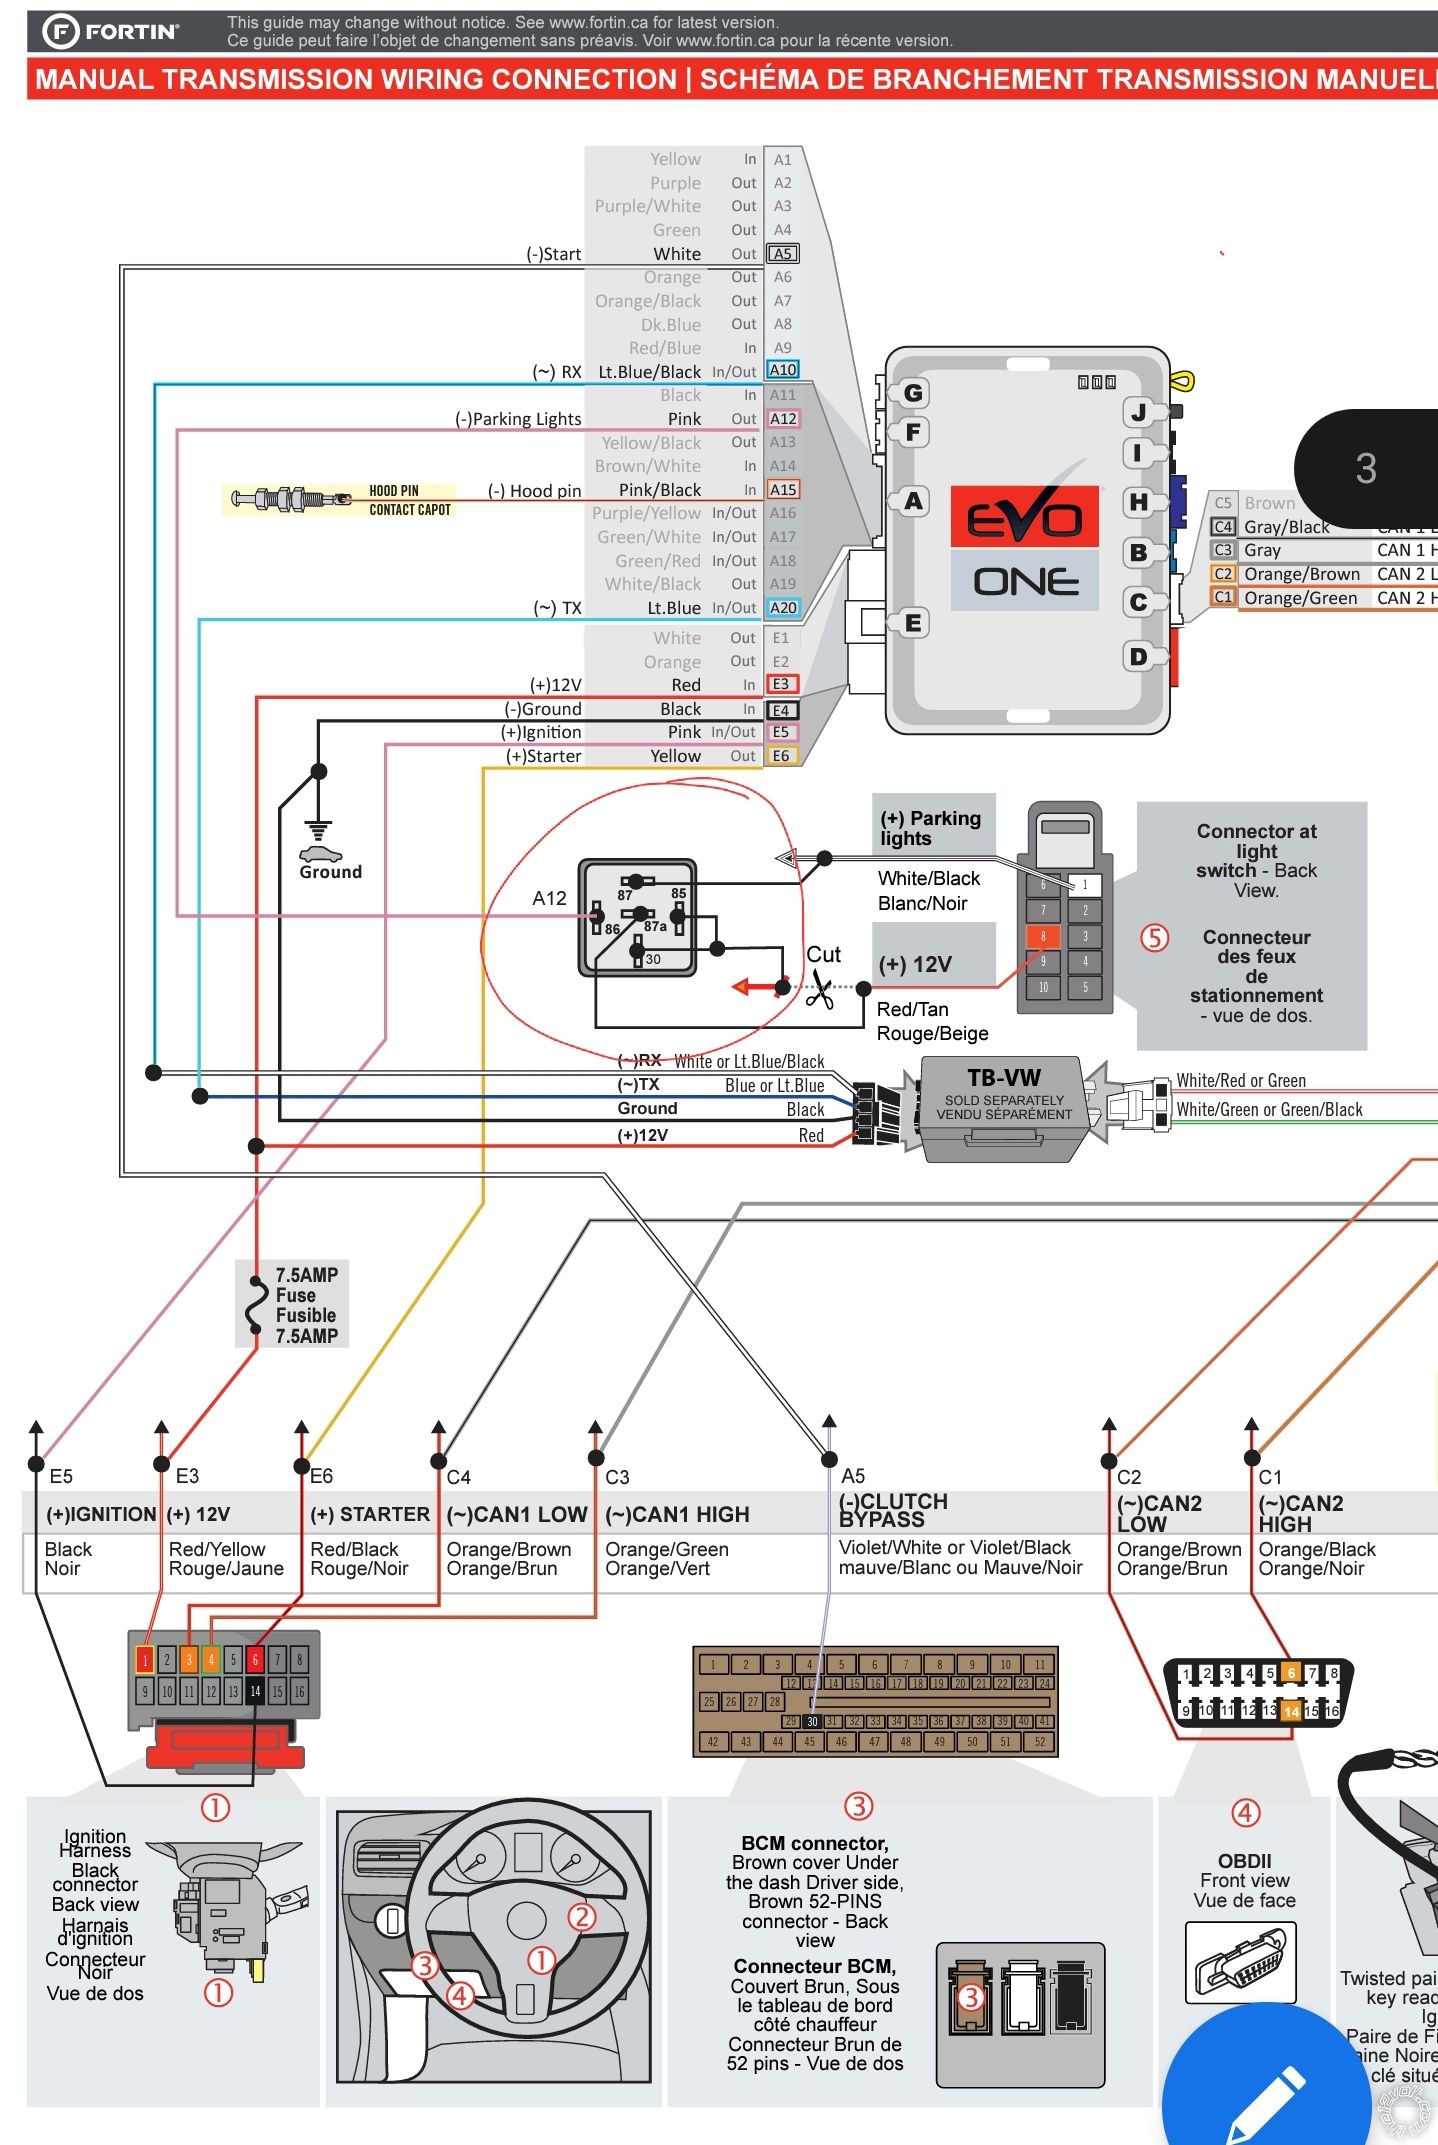 Fortin EVO One Relay Wiring -- posted image.